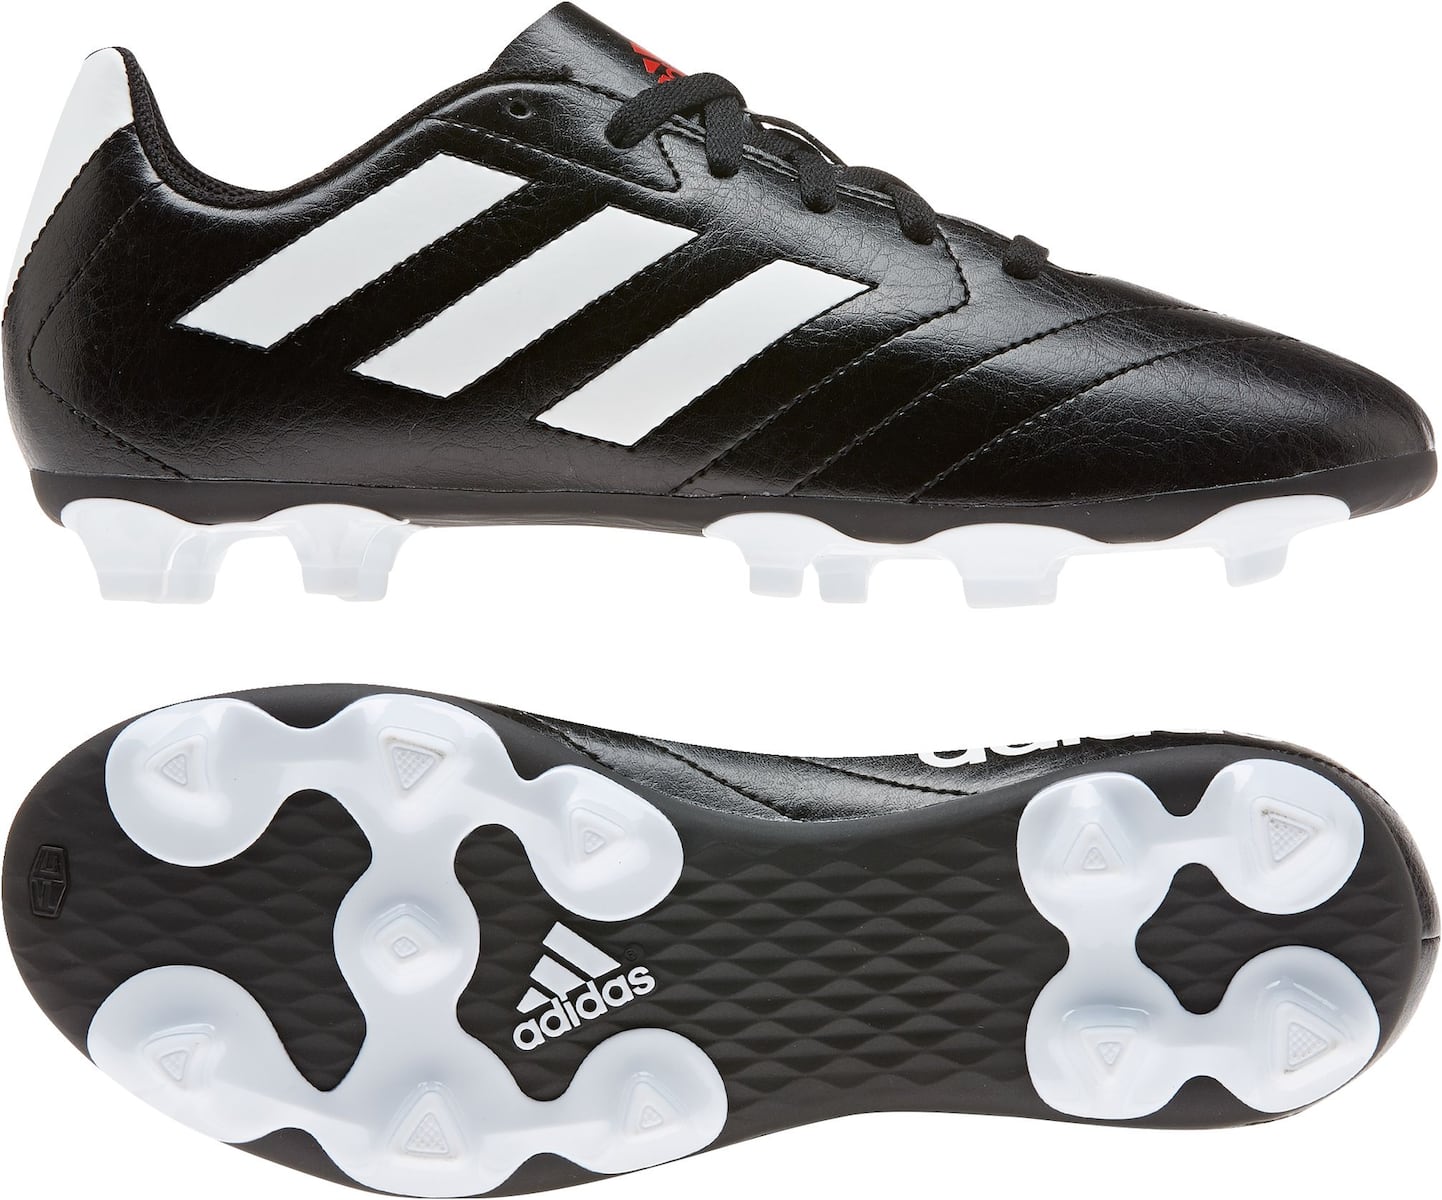 Adidas Conquisto II FG Junior Kids' Firm Ground Soccer Cleats/Shoes, Assorted Canadian Tire